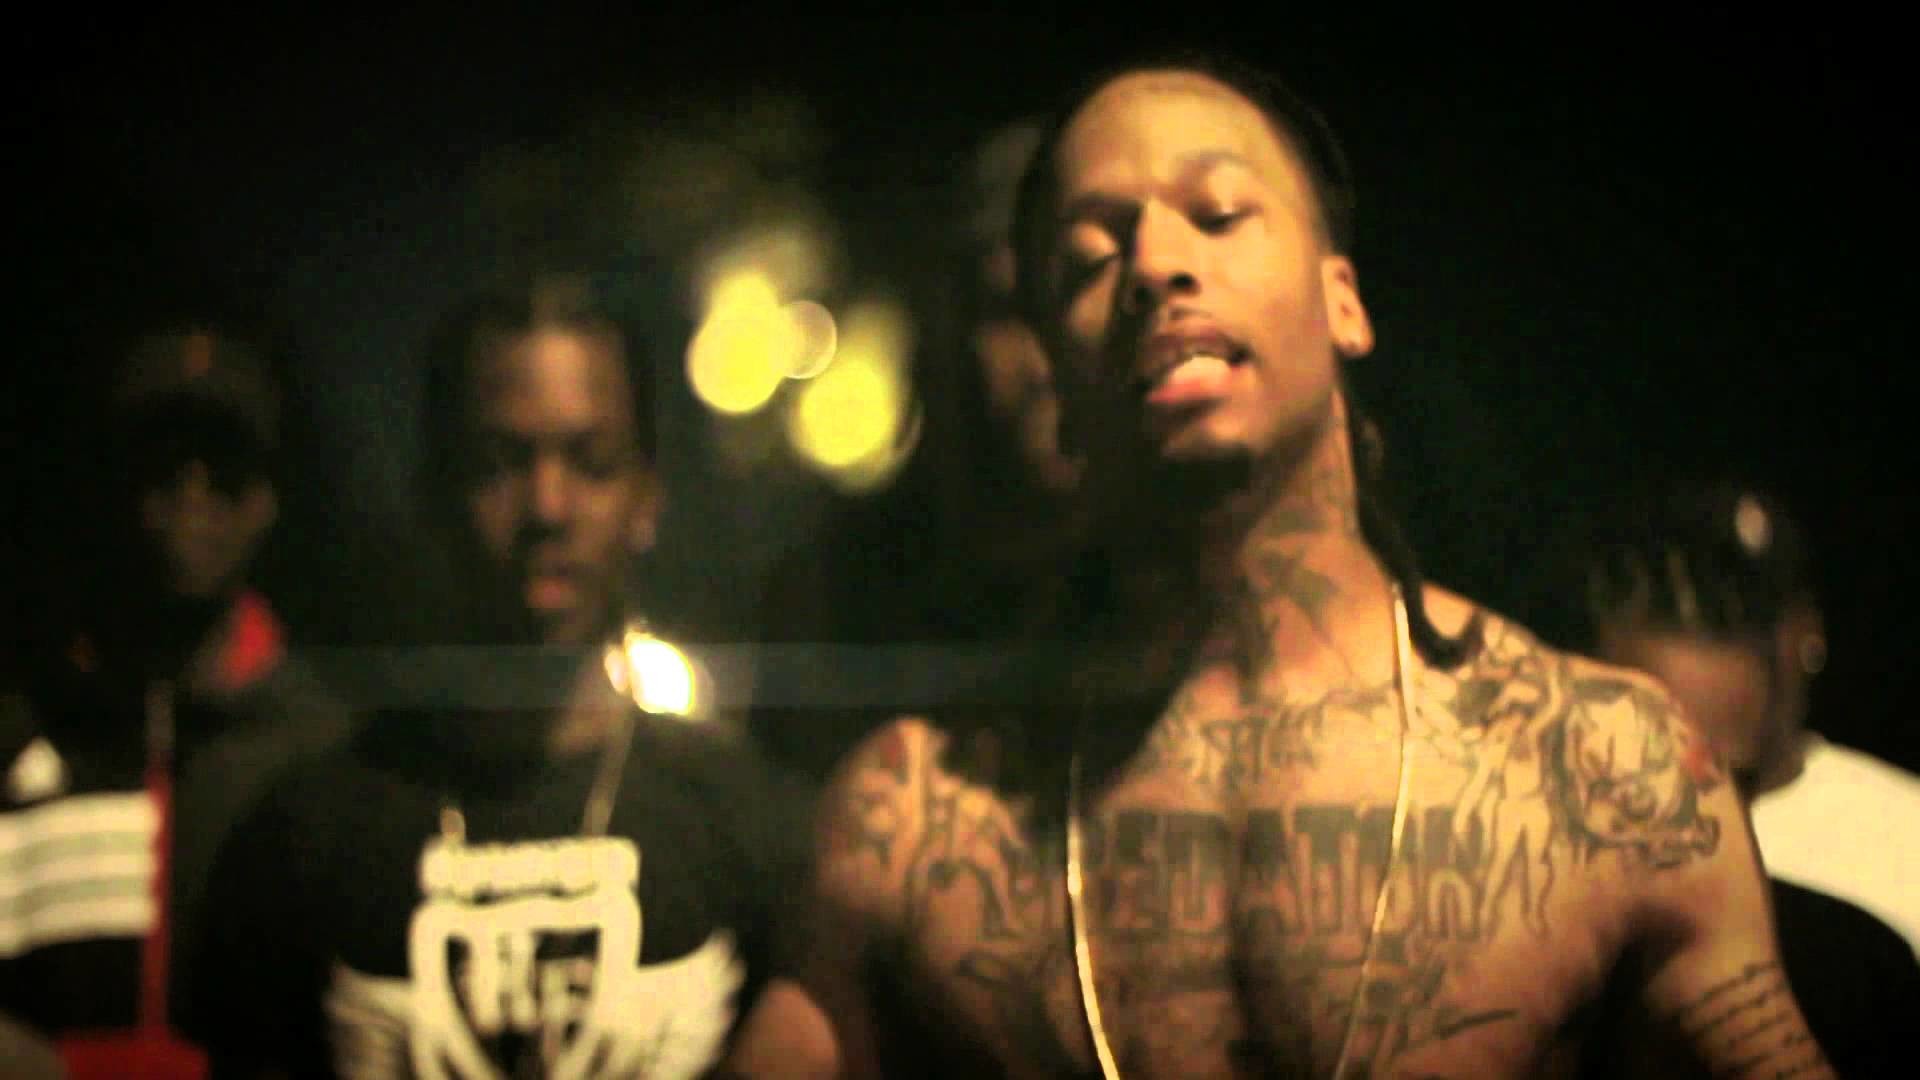 1920x1080 Montana of 300 ft. Talley of 300 – Bout That Life | Dir. @